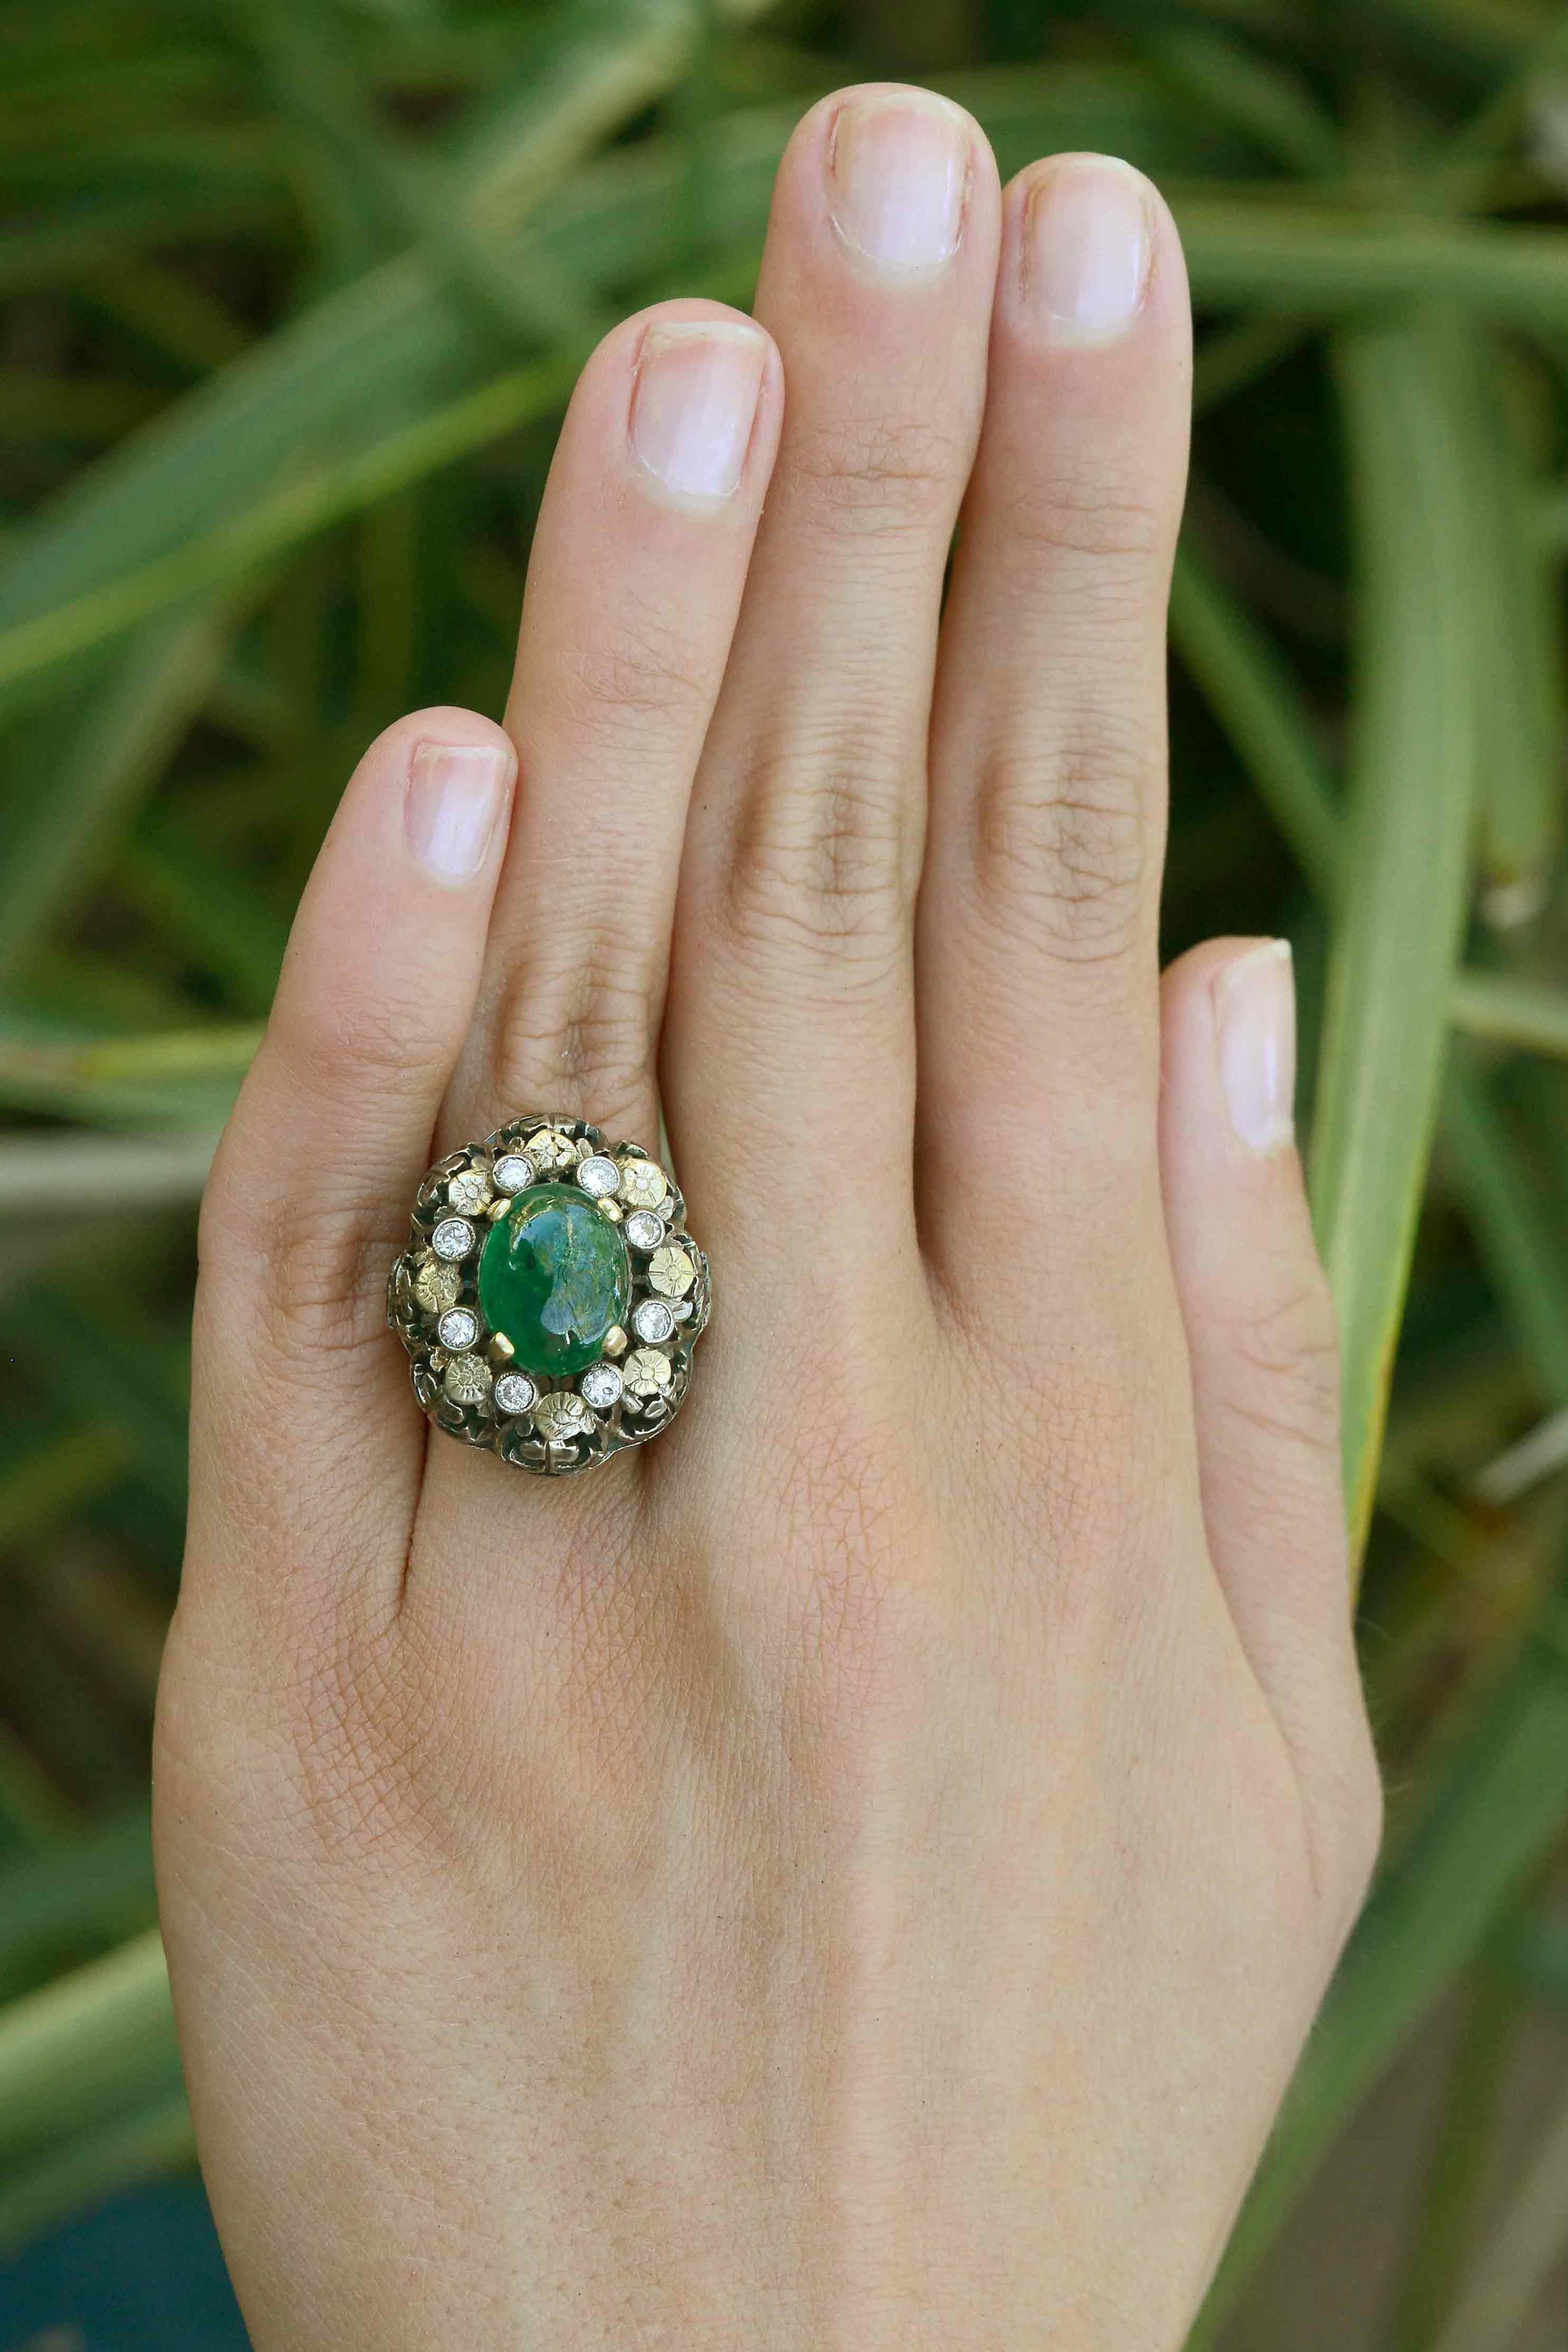 The Gilchrist antique 3 carat oval emerald cocktail ring is an exciting dome designed as a flower cluster. Centered by a natural Colombian emerald in cabochon, surrounded by sparkling brilliant diamonds and dotted with a floral motif. The 2 tone